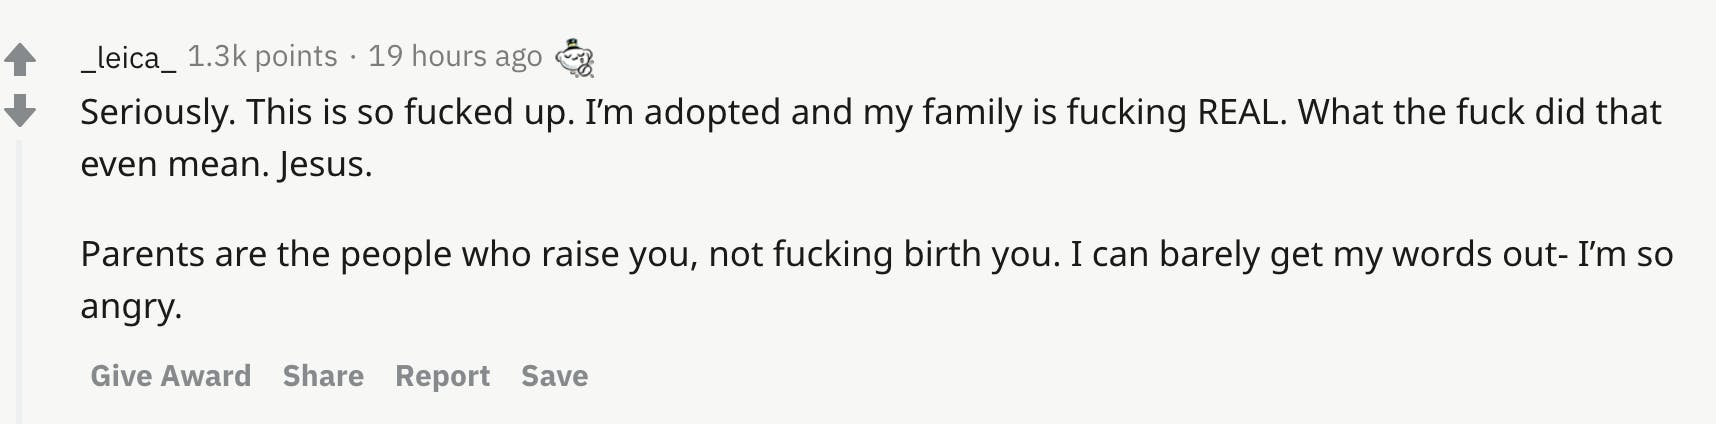 Seriously. This is so fucked up. I’m adopted and my family is fucking REAL. What the fuck did that even mean. Jesus.  Parents are the people who raise you, not fucking birth you. I can barely get my words out- I’m so angry.